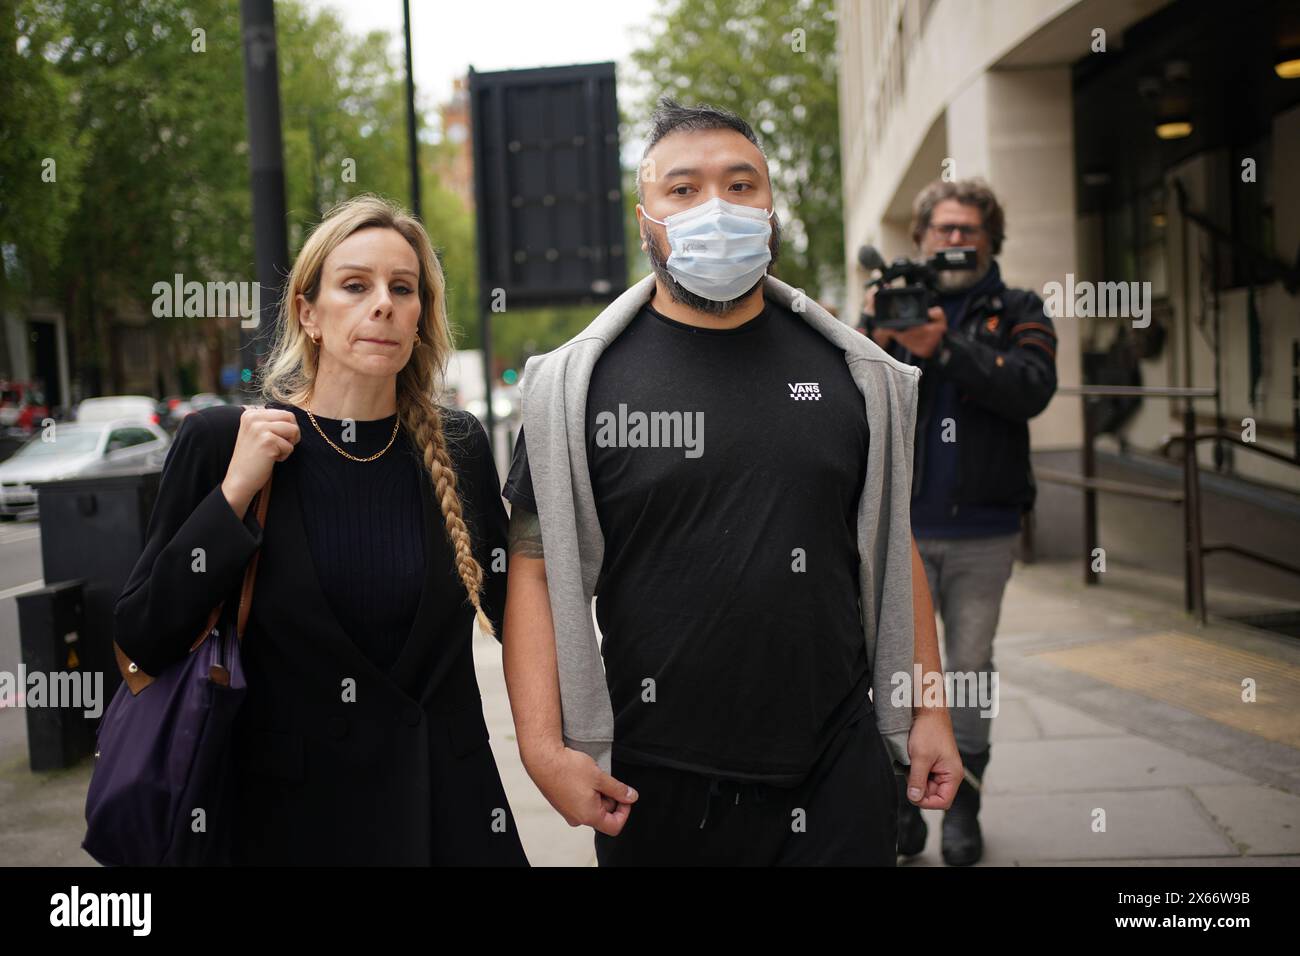 Chi Leung Wai (right) leaves Westminster Magistrates' Court, central London, where he was freed on bail after appearing charged under the National Security Act of assisting a foreign intelligence service in Hong Kong. Chi Leung (Peter) Wai, 38, of Staines-upon-Thames, Matthew Trickett, 37, of Maidenhead, and Chung Biu Yuen, 63, of Hackney, have each been charged with assisting a foreign intelligence service, contrary to section 3(1) and (9) of the National Security Act 2023. They have also each been charged with foreign interference, contrary to section 13(2) and (7) of the National Security A Stock Photo